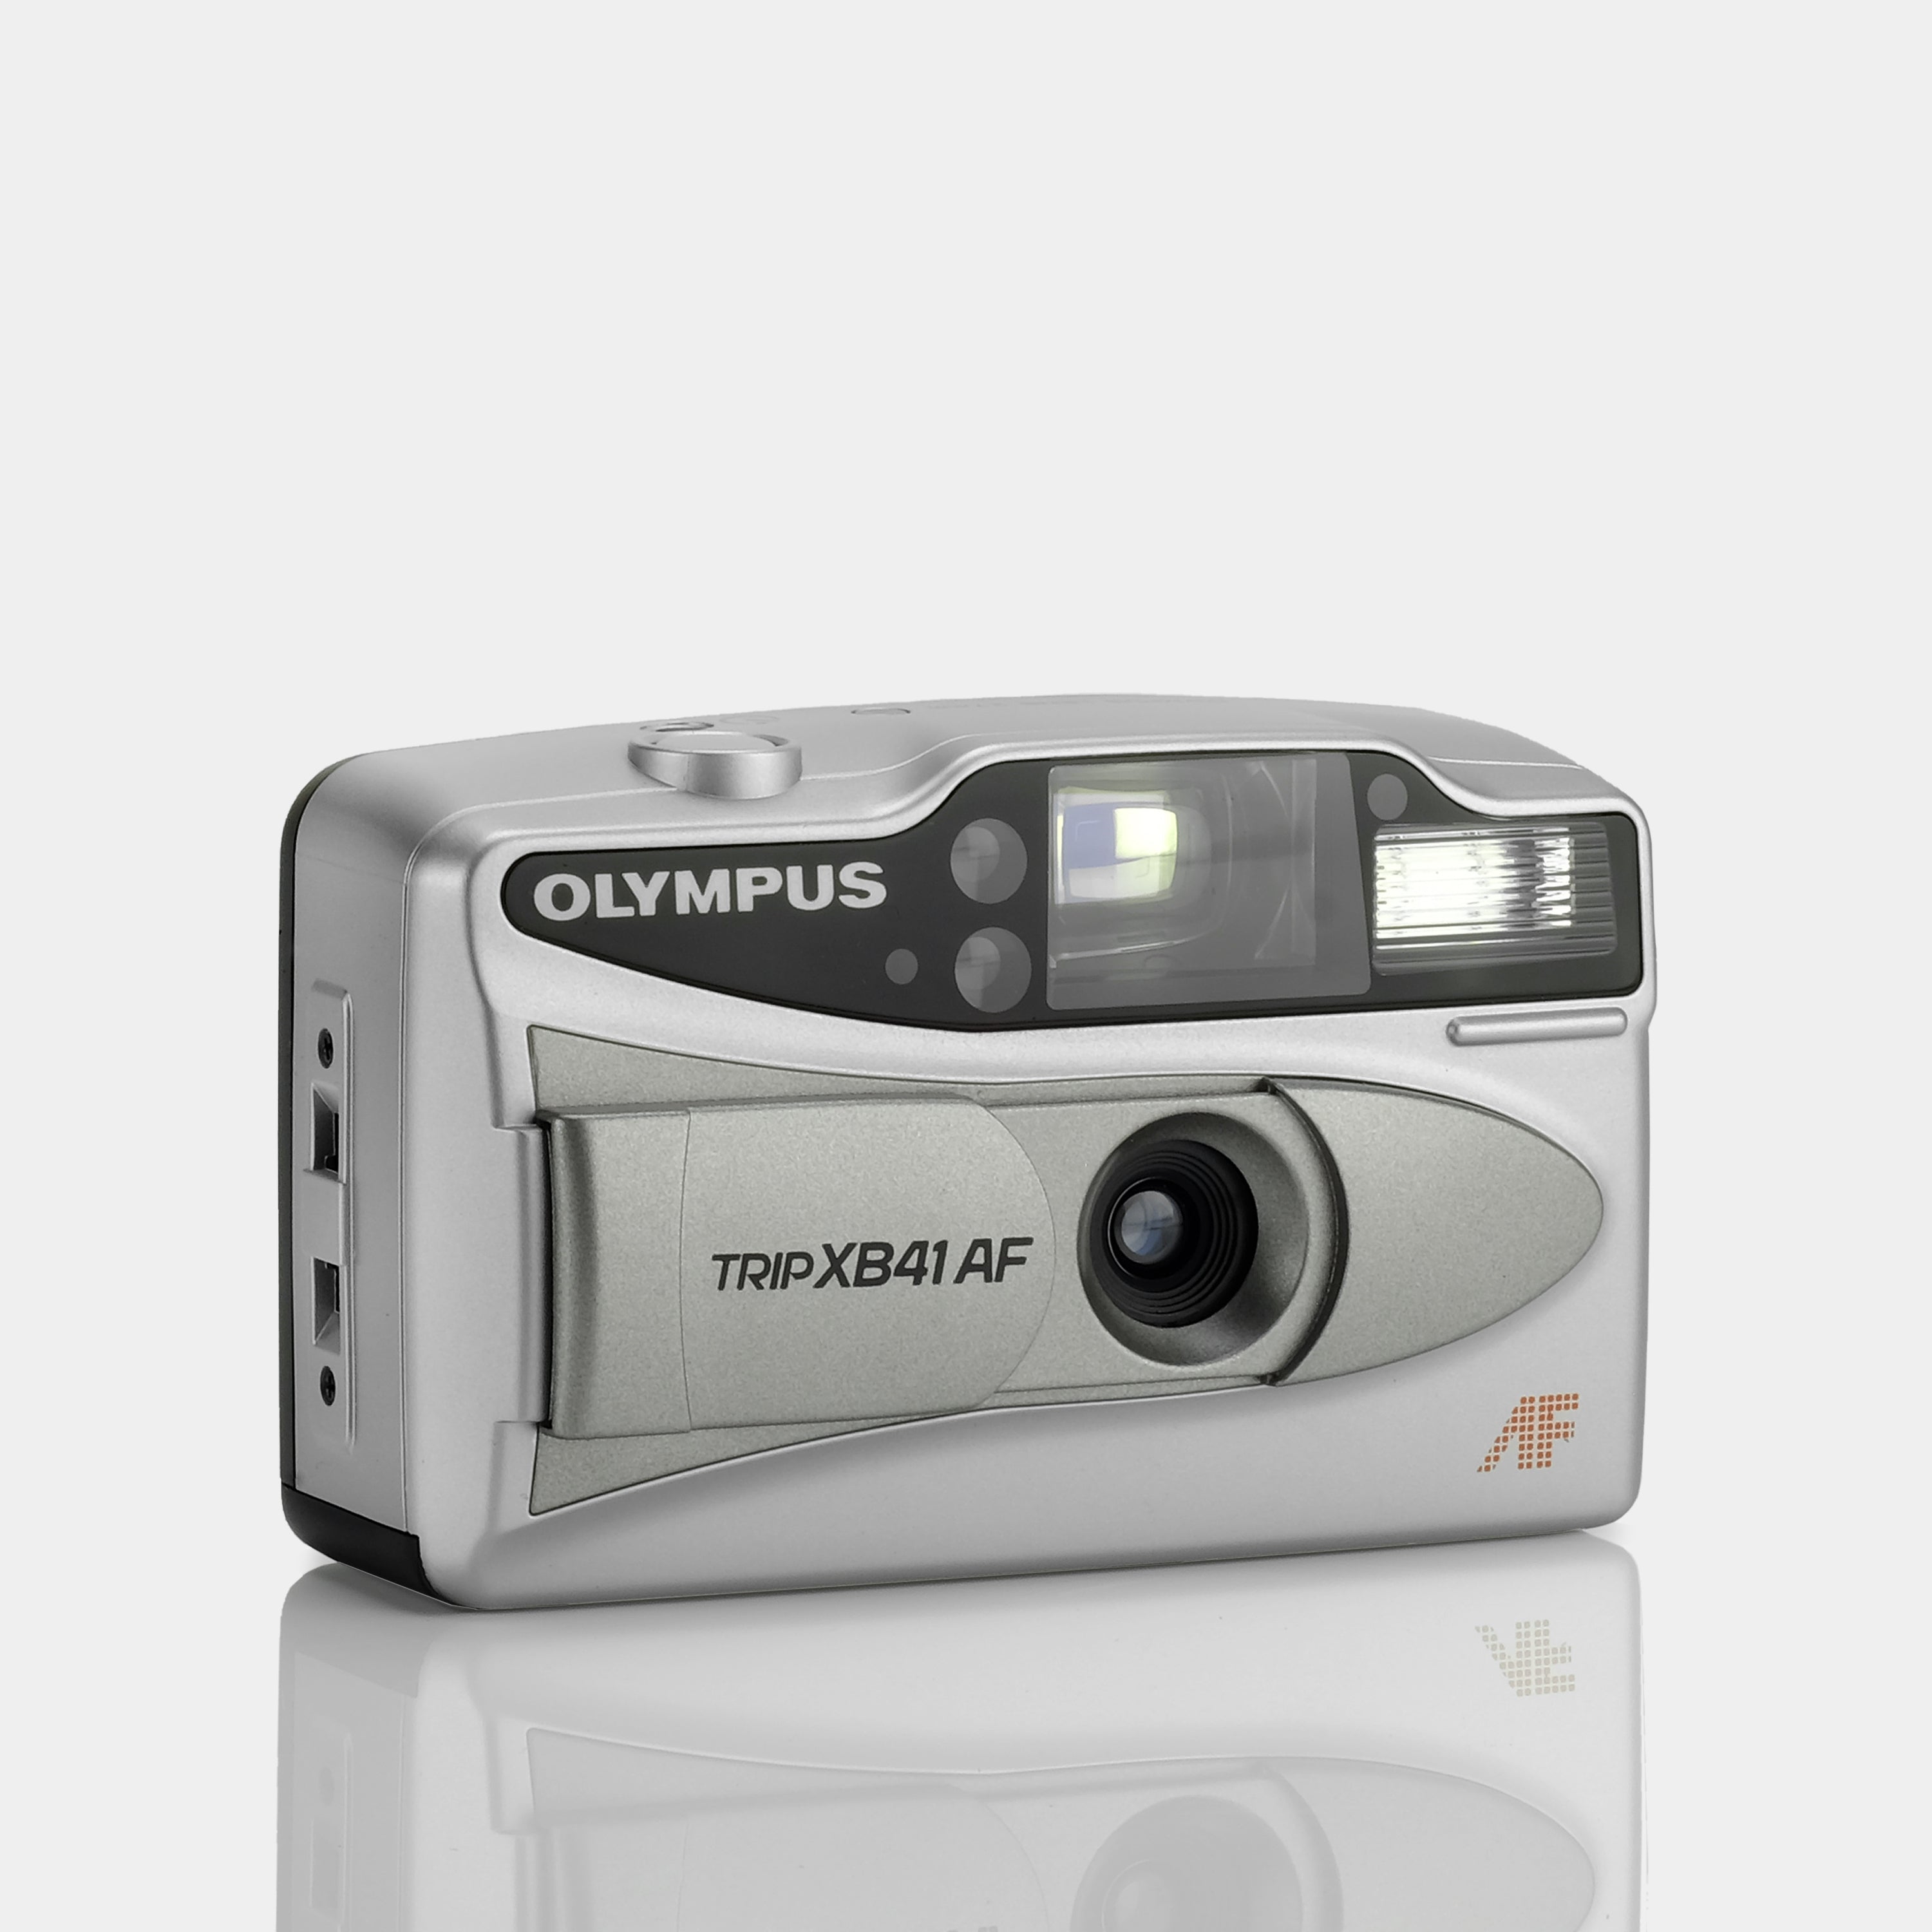 Olympus Trip XB41 AF 35mm Point And Shoot Film Camera (New Old Stock)